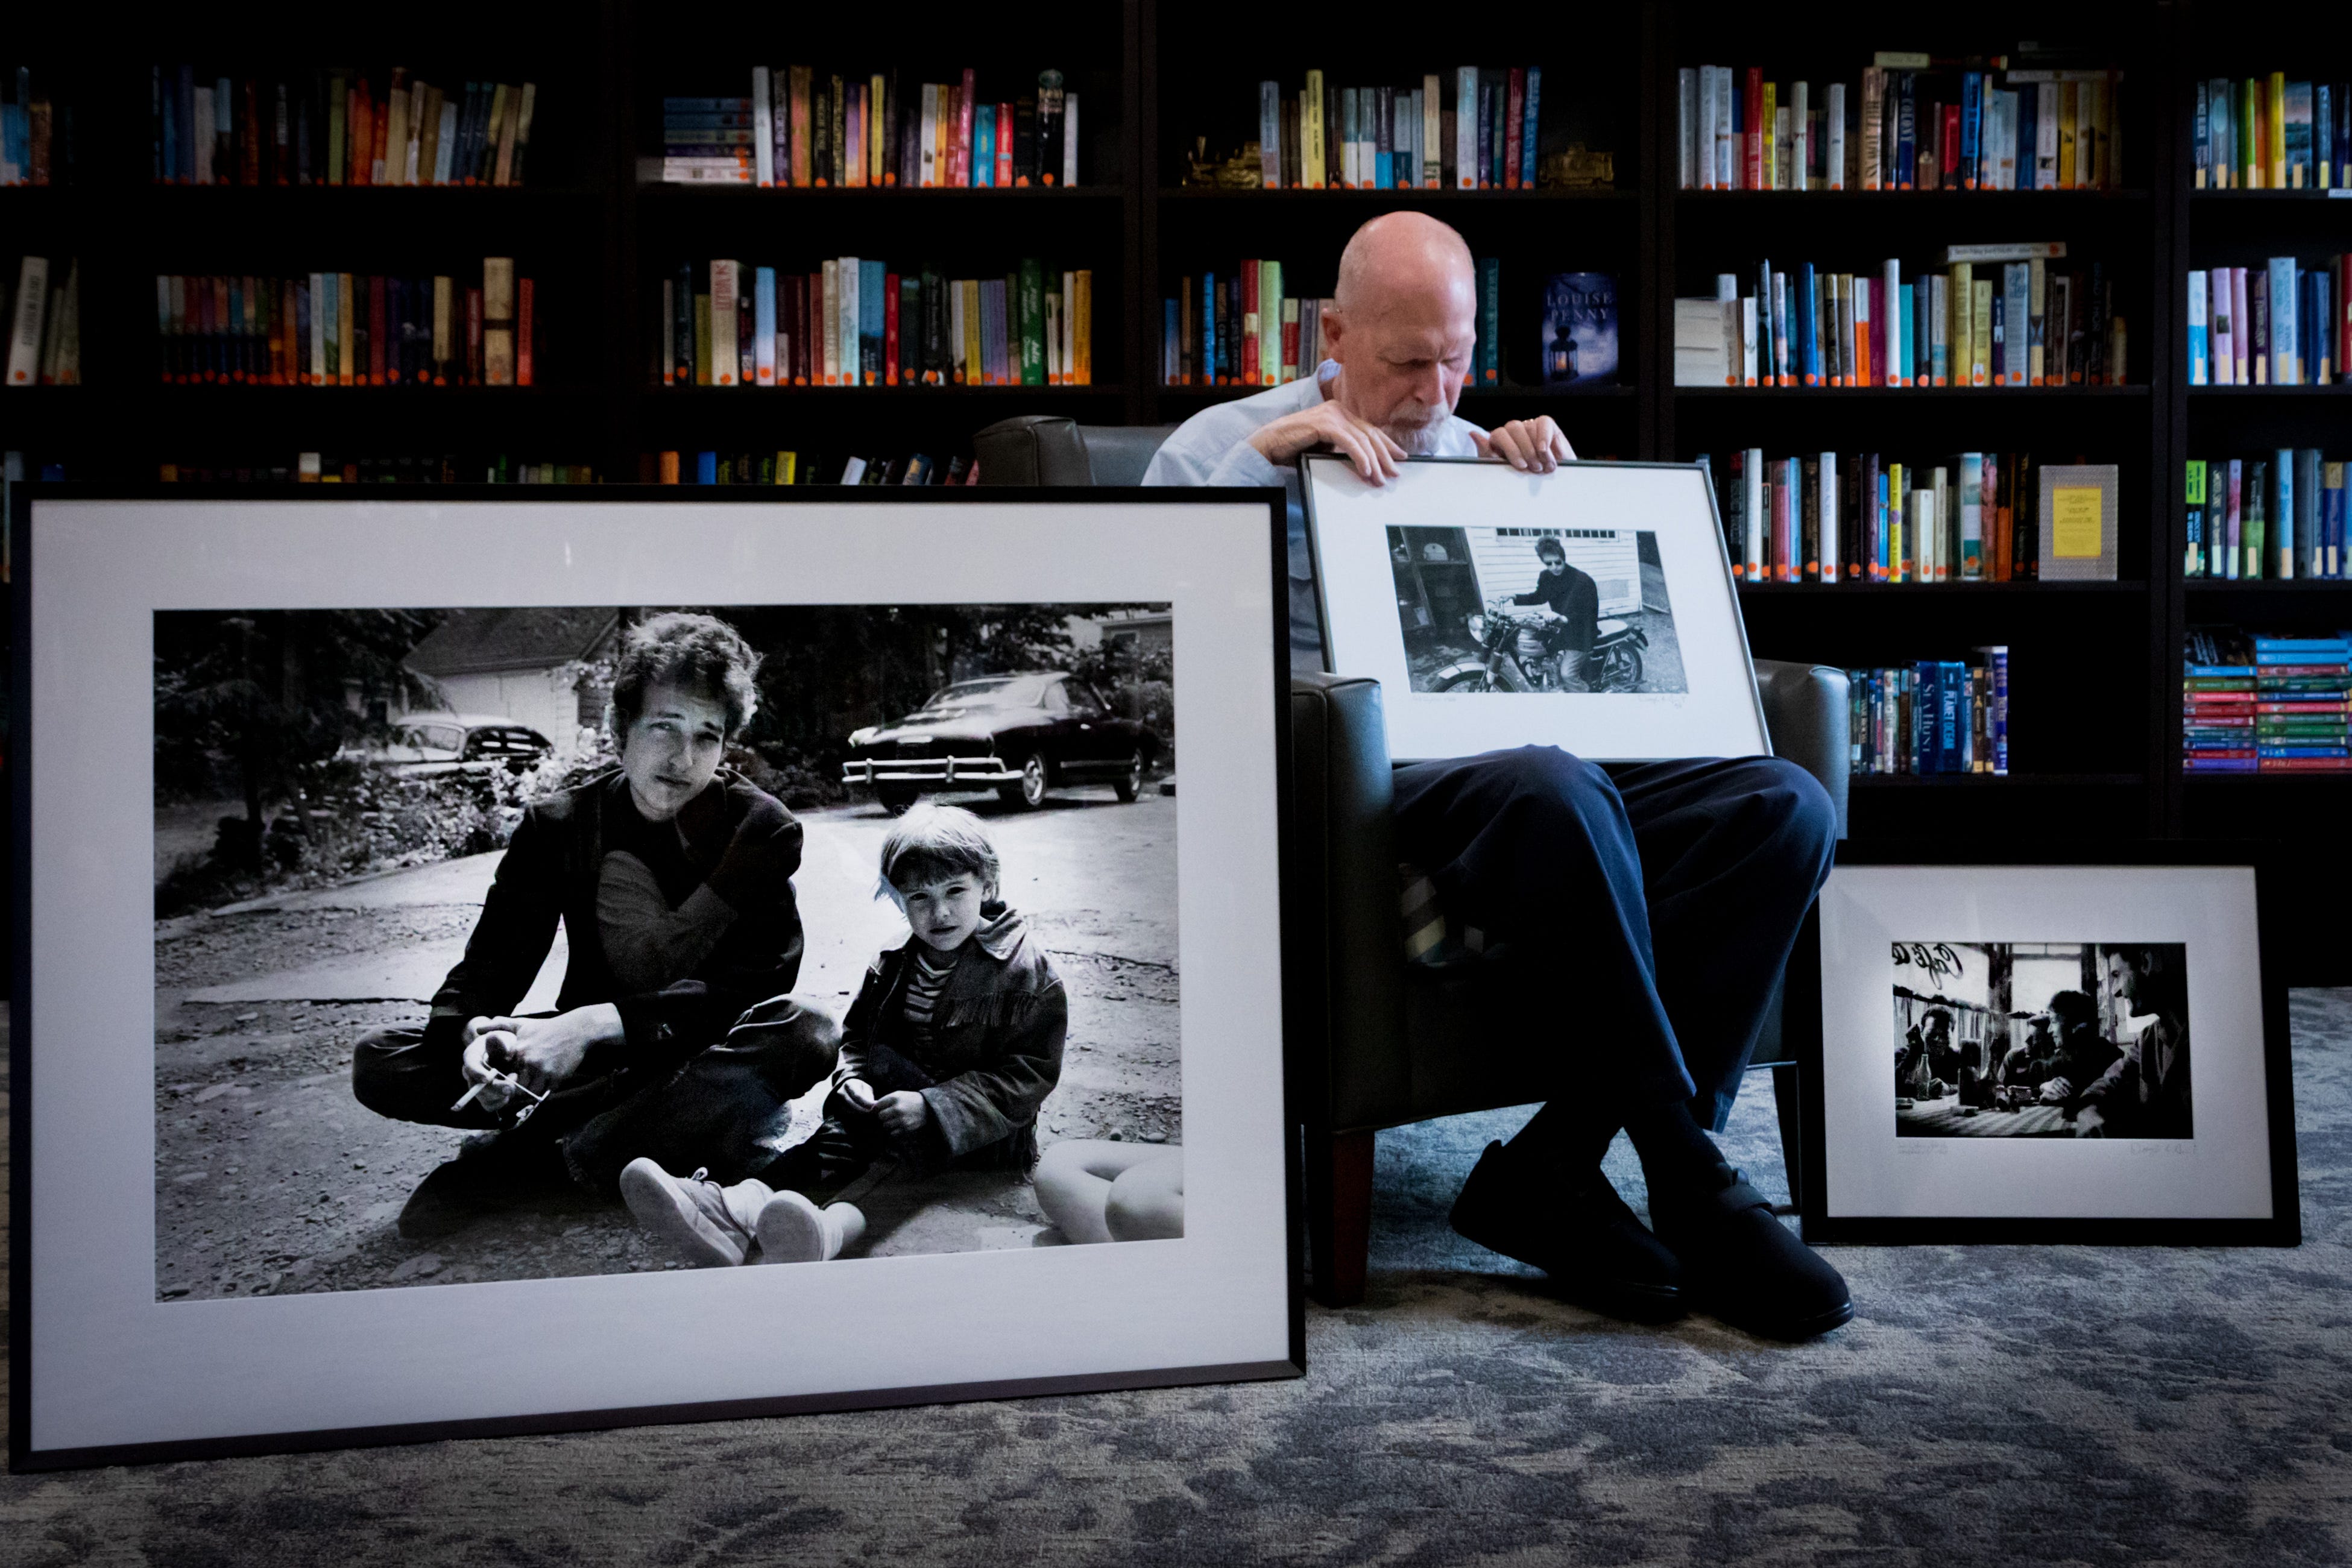 Douglas R. Gilbert displays photographs he made of Bob Dylan back in 1964. The large photo in front is of Bob Dylan behind the Cafe Espresso in Woodstock, NY with the daughter of Bernard and Mary Lou Paturel (owners of the cafe). The photo being held is Bob Dylan on a Triumph, behind Cafe Espresso, Woodstock, NY. The photo on the far right is (left to right) Mason Hoffenberg, John Sebastian, Bob Dylan and Victor Maymudes at Cafe Espresso, Woodstock, NY.